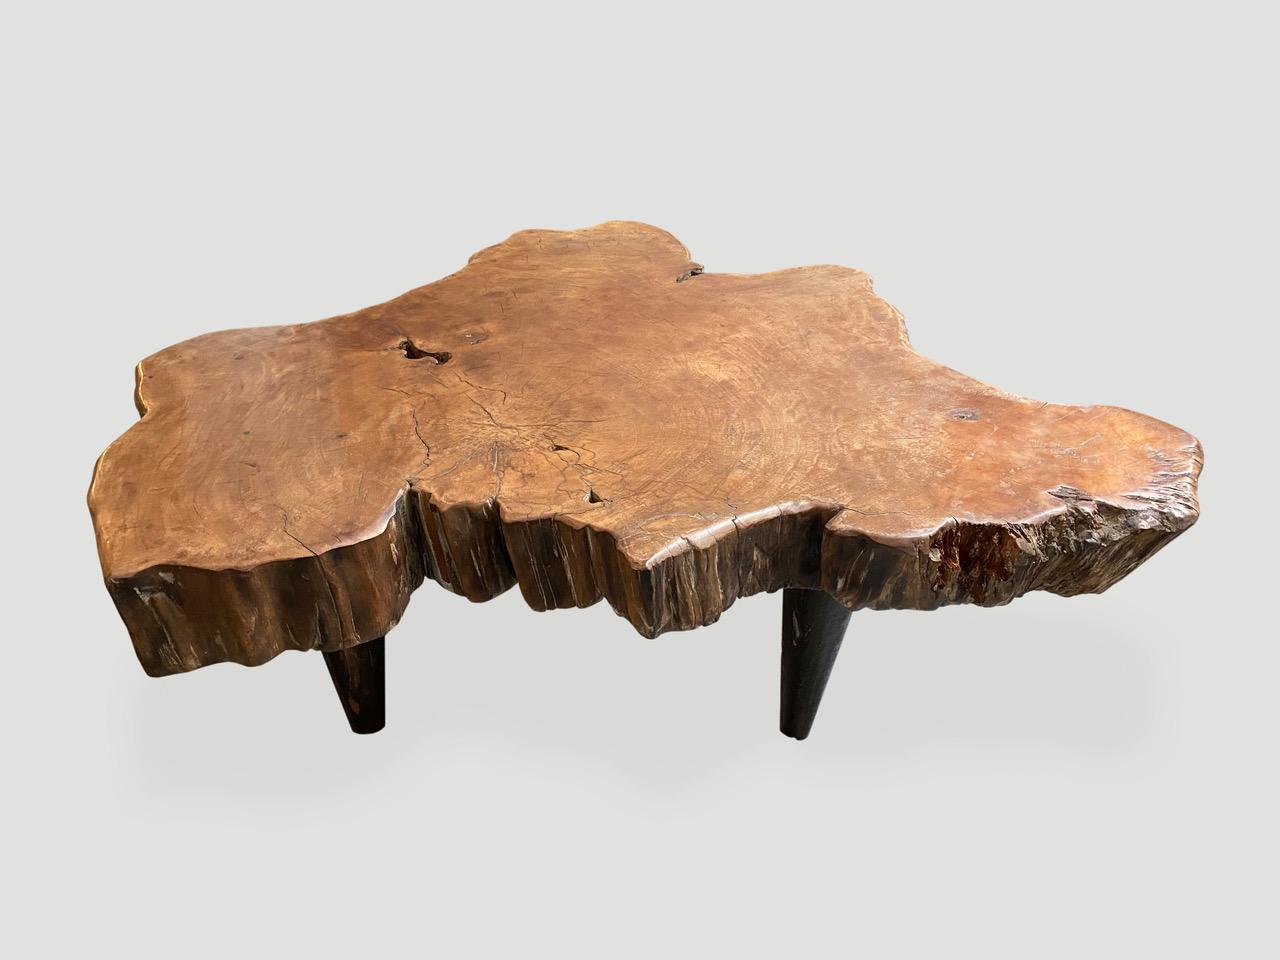 Reclaimed three inch thick lychee wood coffee table with a natural oil finish. Floating on midcentury style cone legs. Organic with a twist.

Own an Andrianna Shamaris original.

Andrianna Shamaris. The Leader In Modern Organic Design.